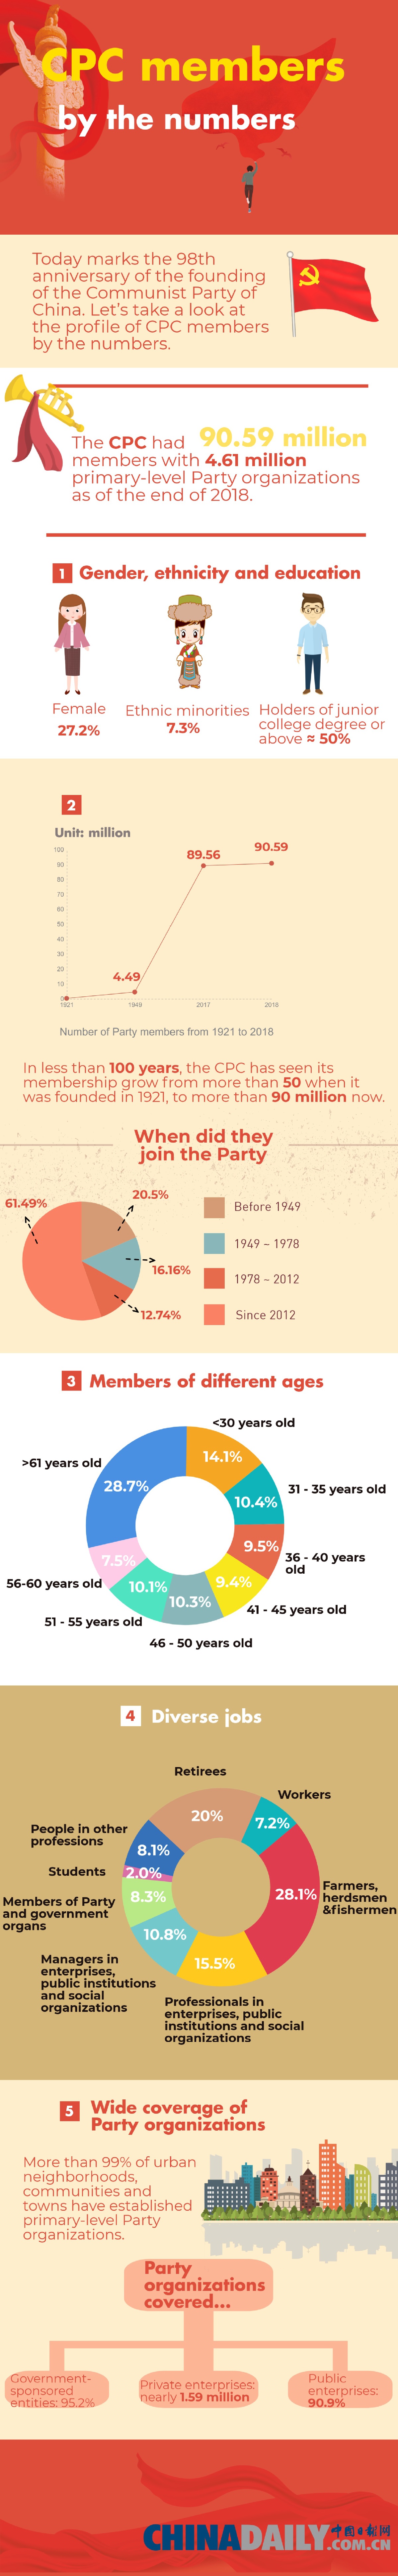 CPC members by the numbers - Chinadaily.com.cn